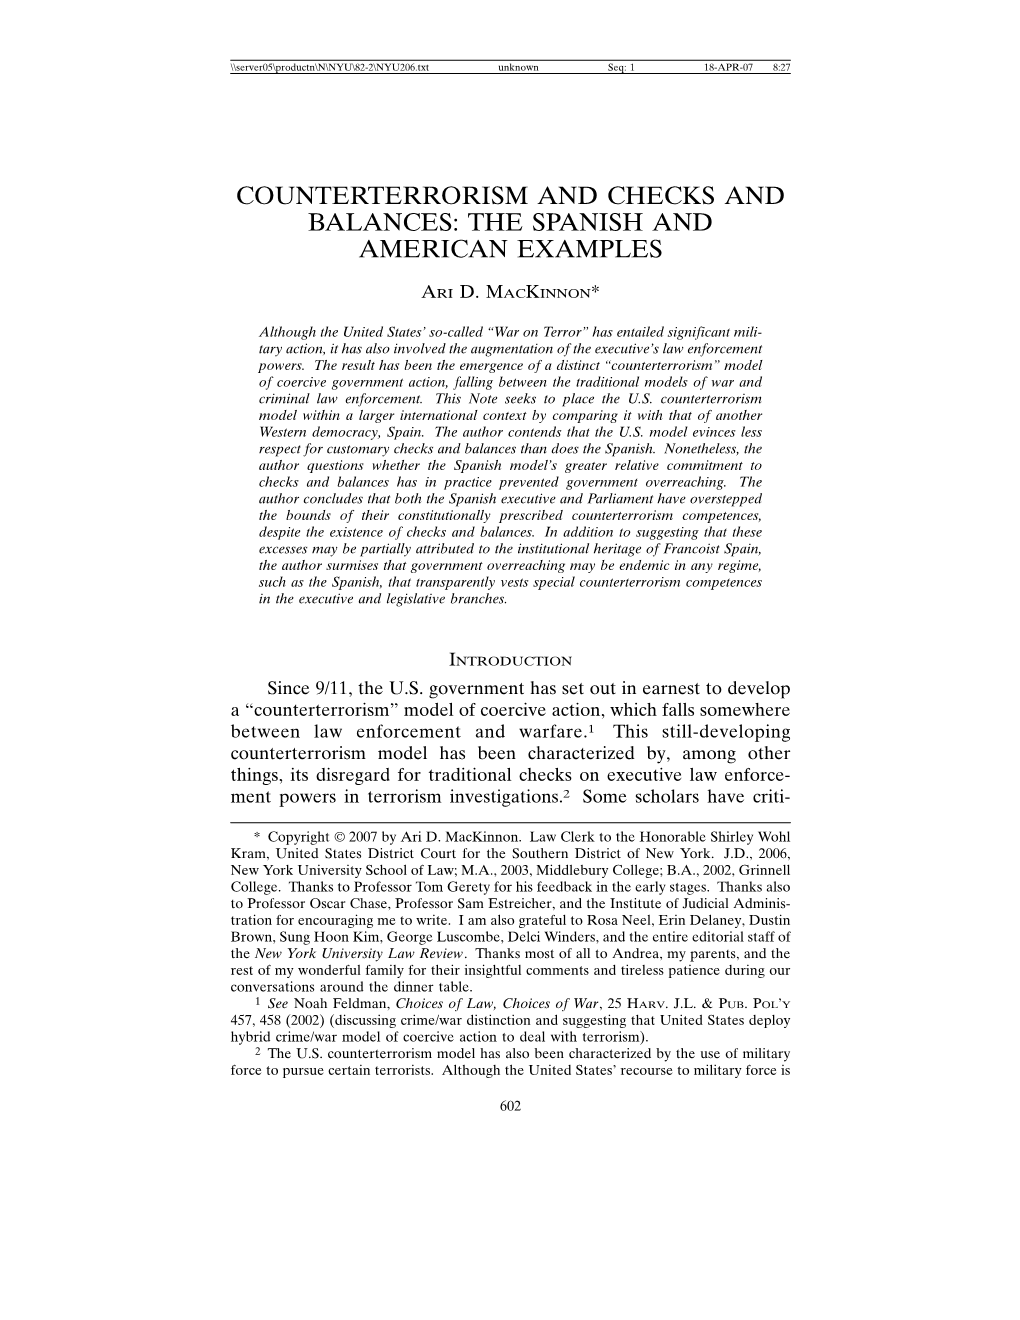 Counterterrorism and Checks and Balances: the Spanish and American Examples